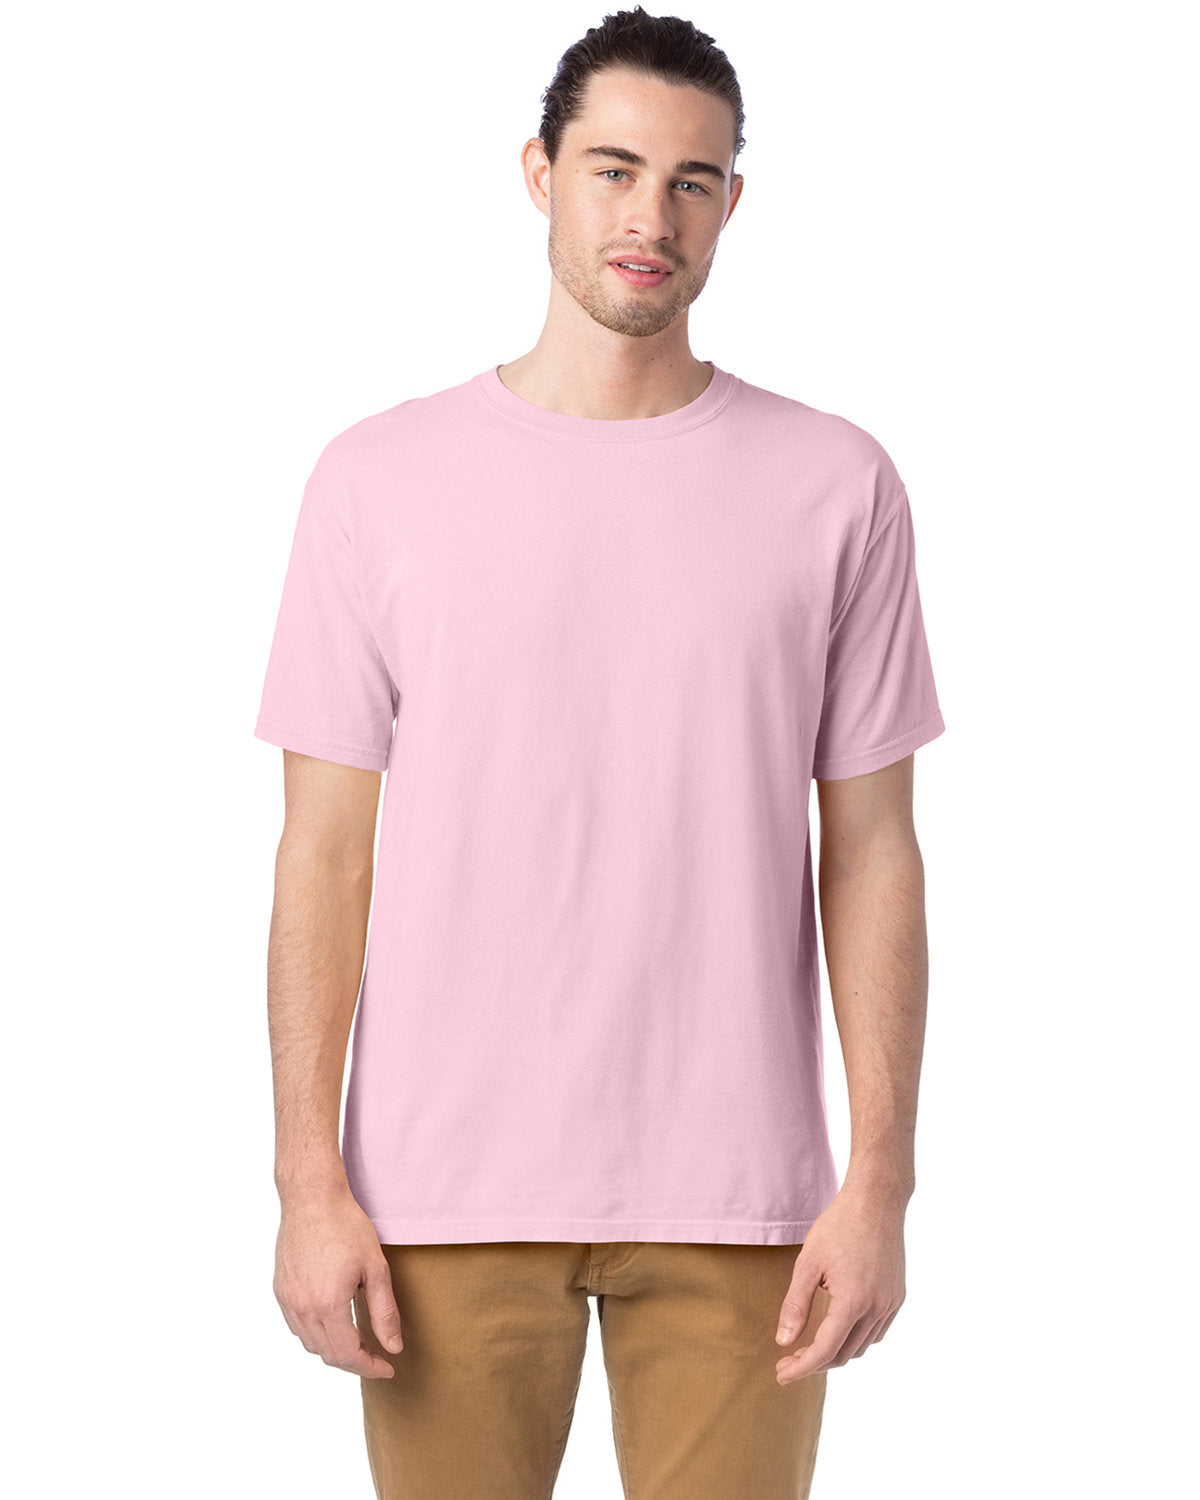 GDH100-CWH-01-COTTONCANDY-XS